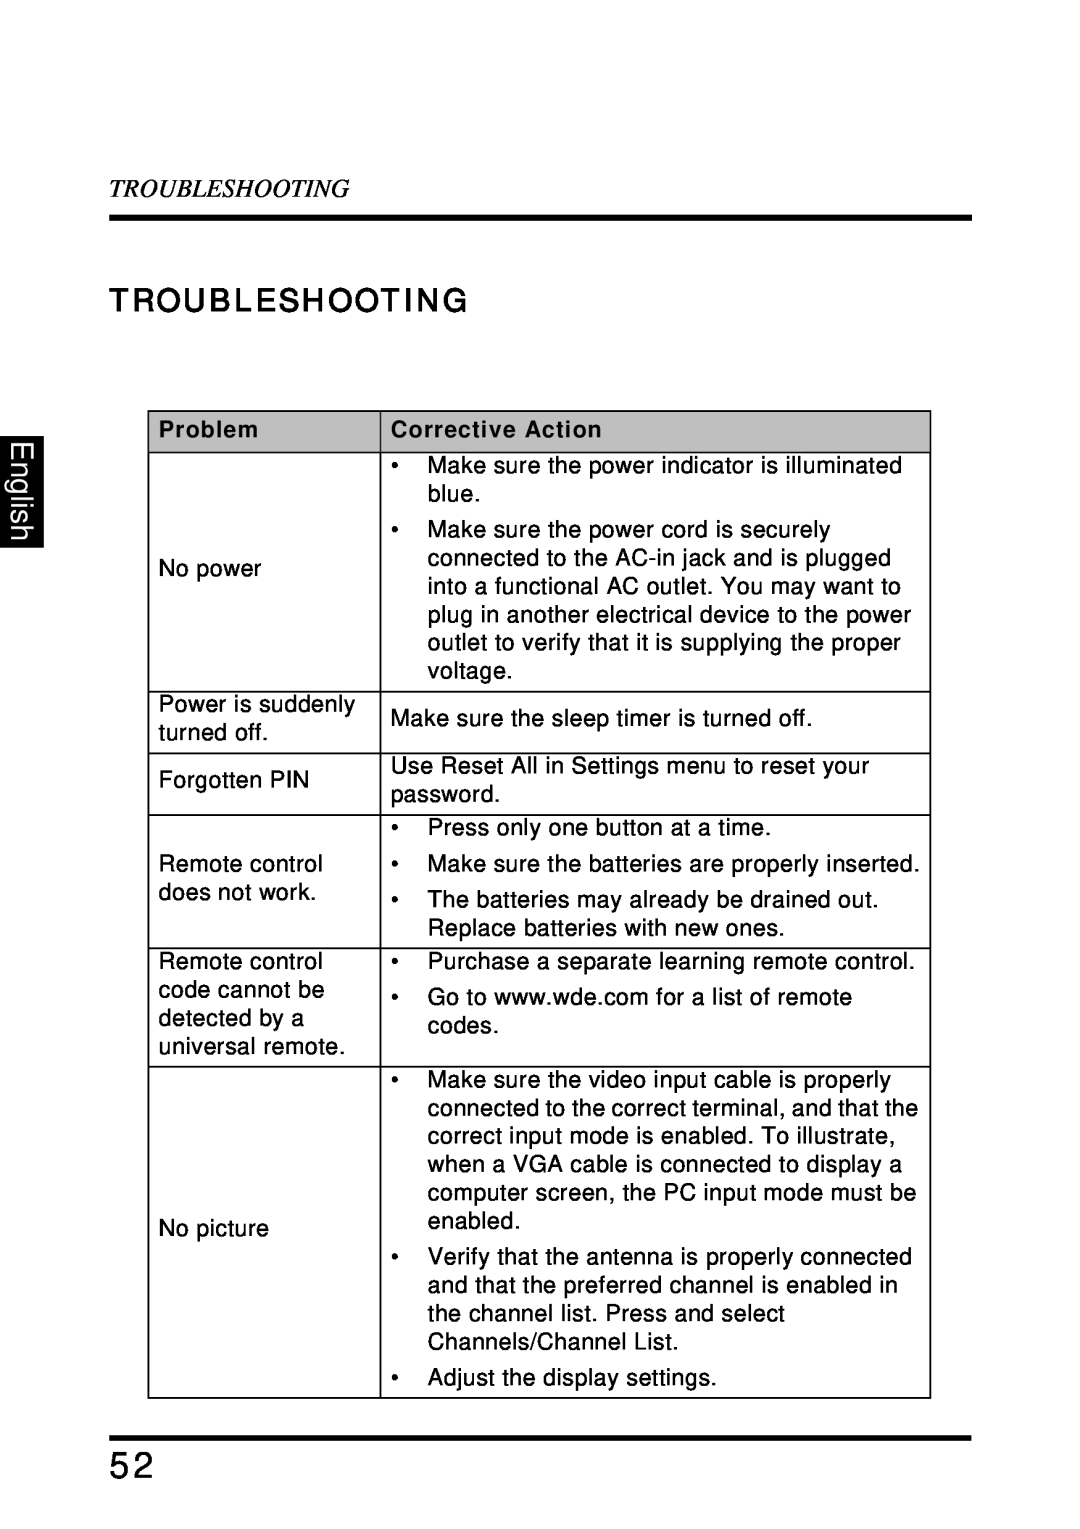 Westinghouse SK-32H640G user manual Troubleshooting, English, Problem, Corrective Action 